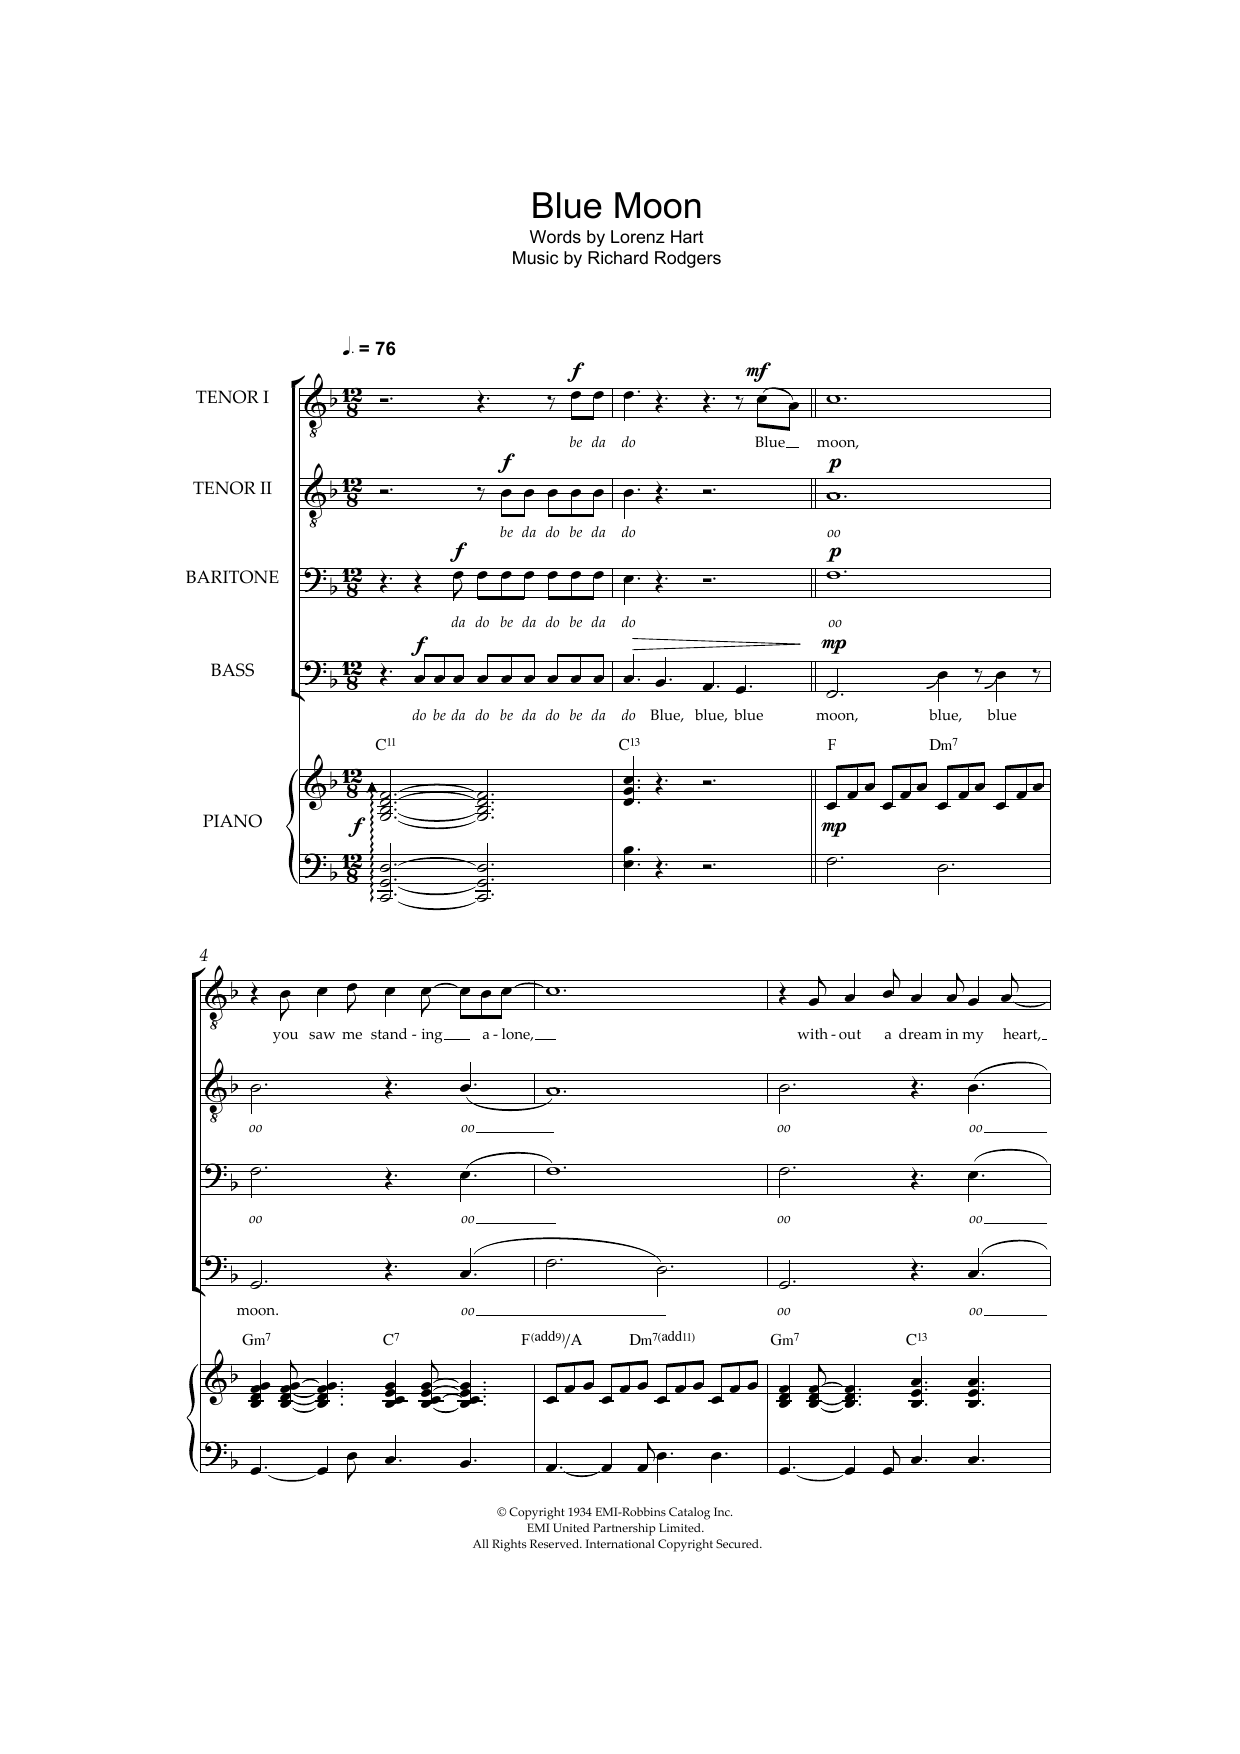 Download The Marcels Blue Moon Sheet Music